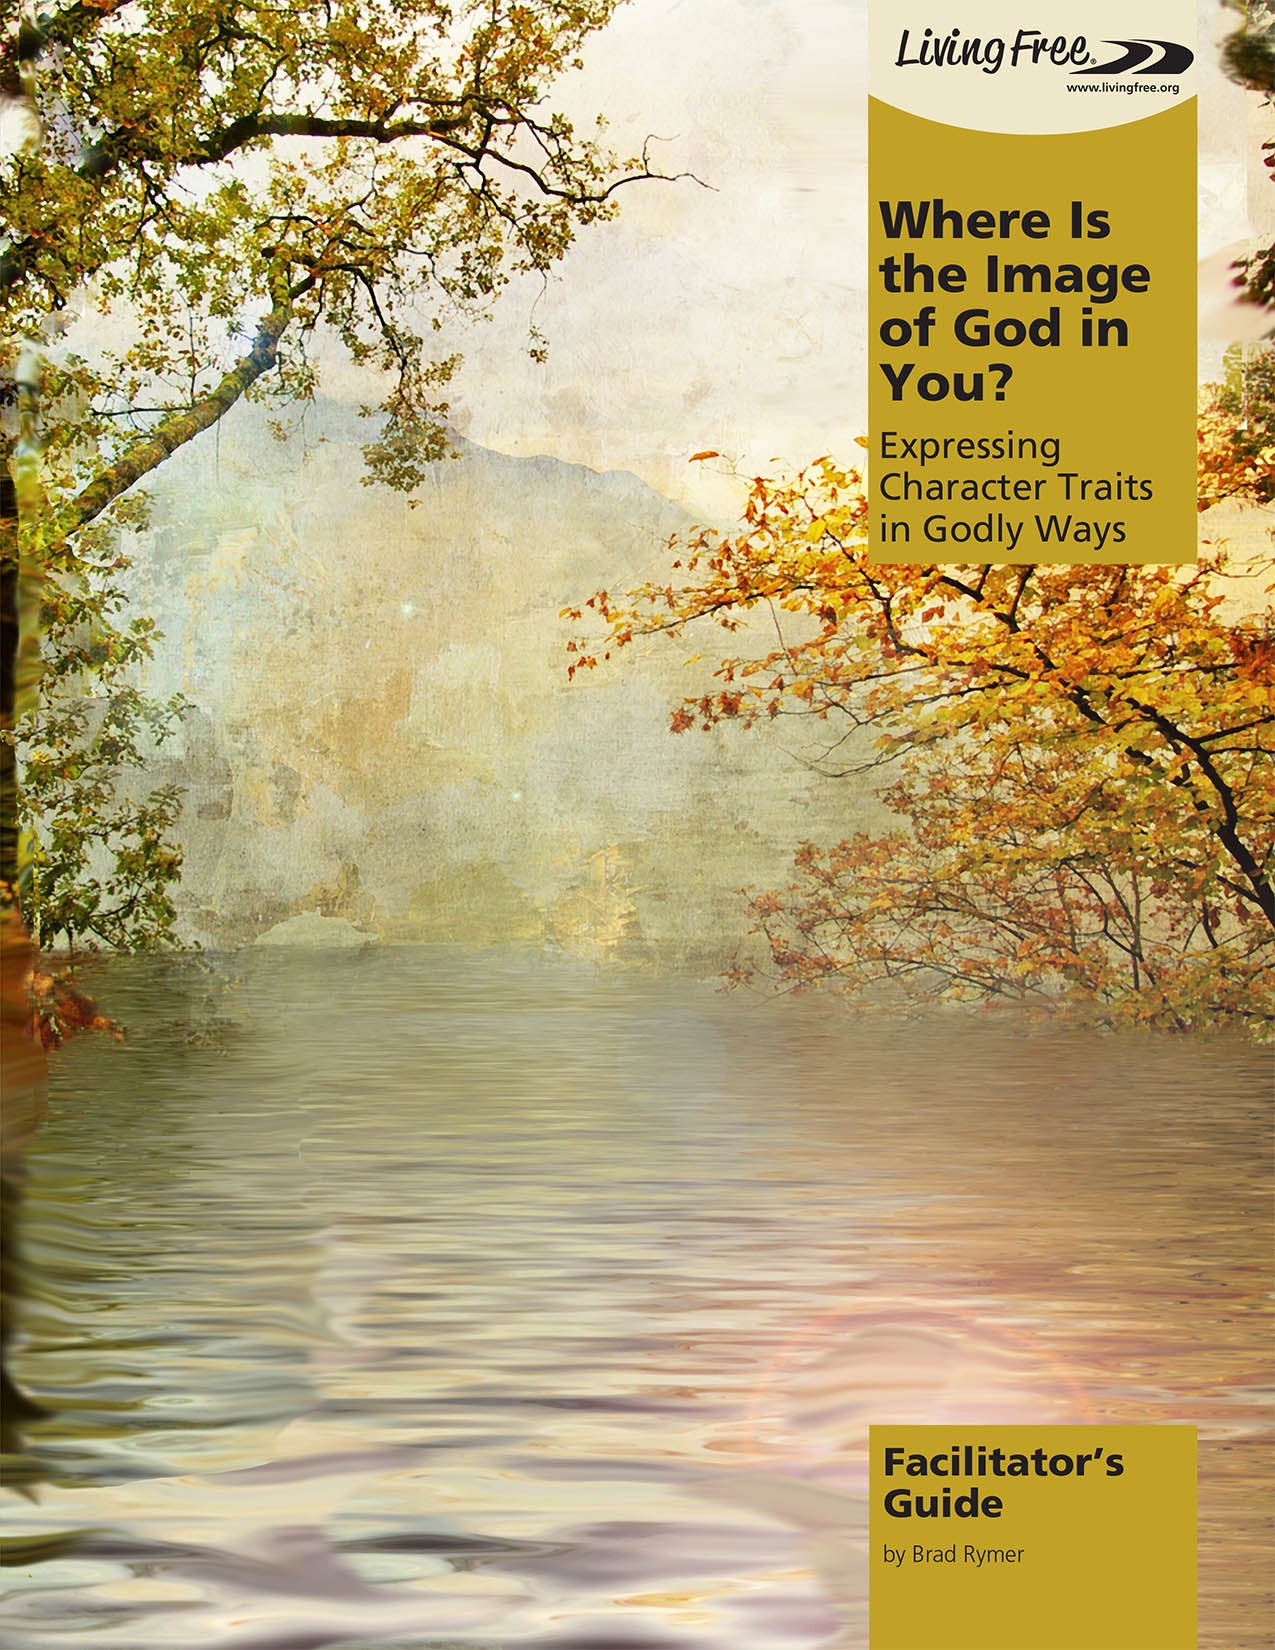 Where is the Image of God in You? Facilitator's Guide